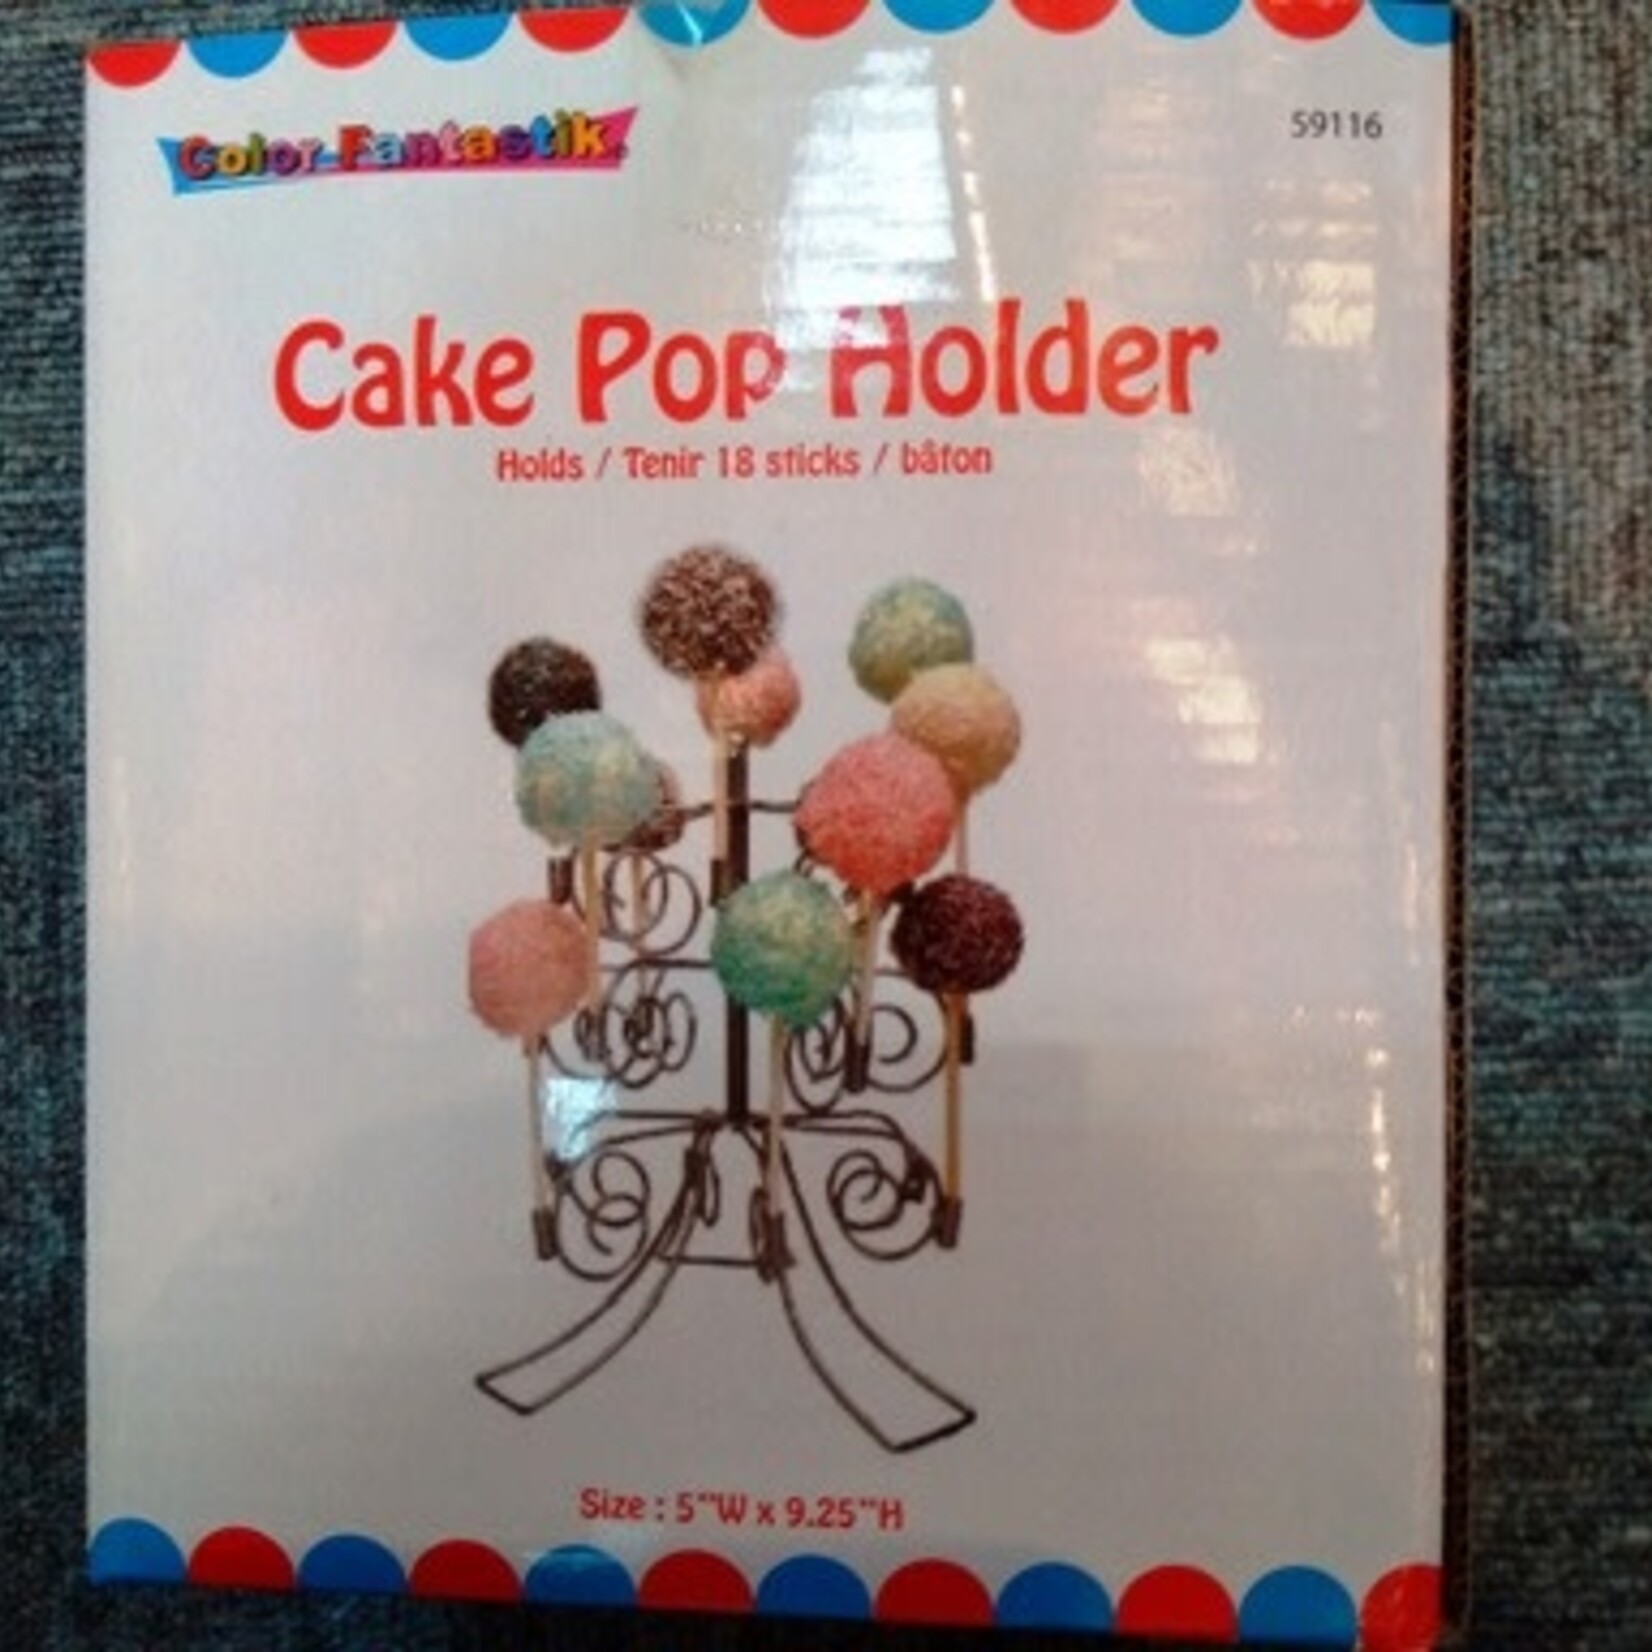 Fancy Cake Pop Holder Silver 4.75X5.5X6.25 Inches